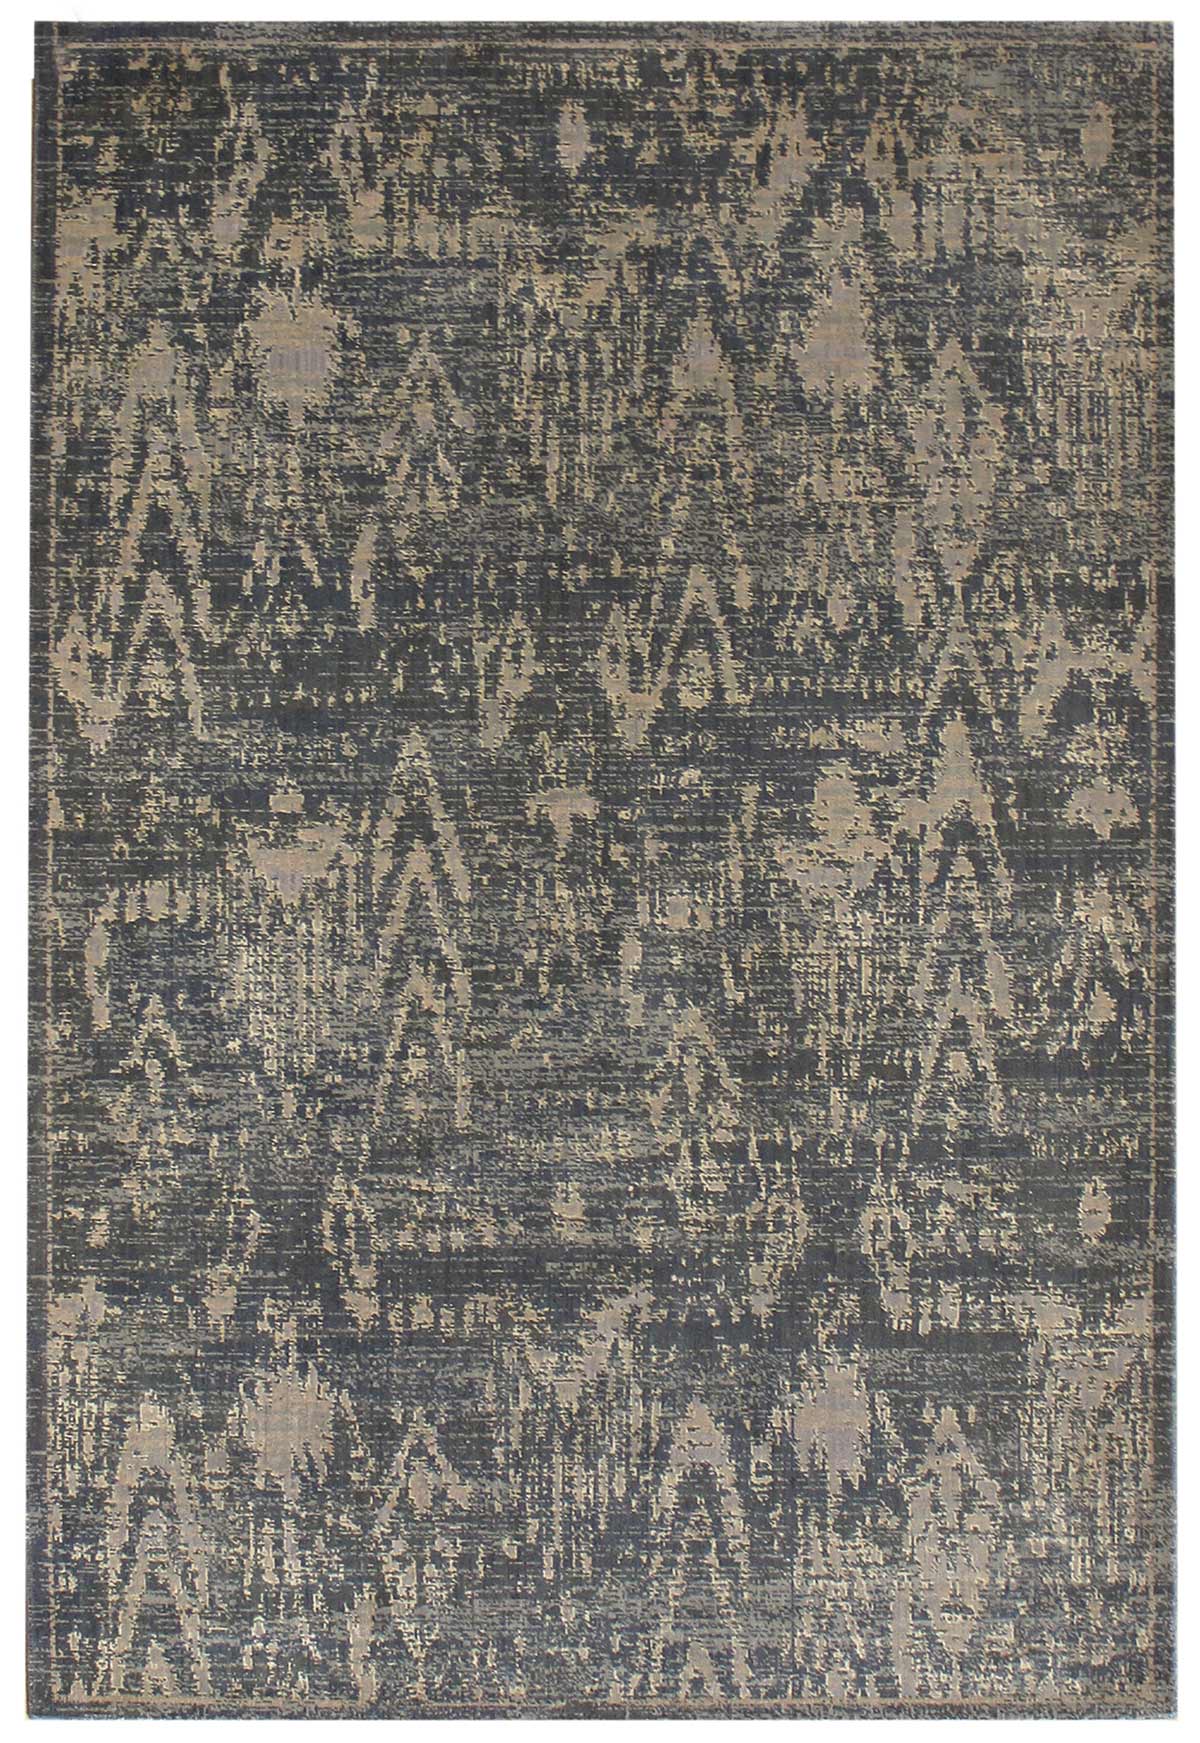  Handwoven Transitional Rug